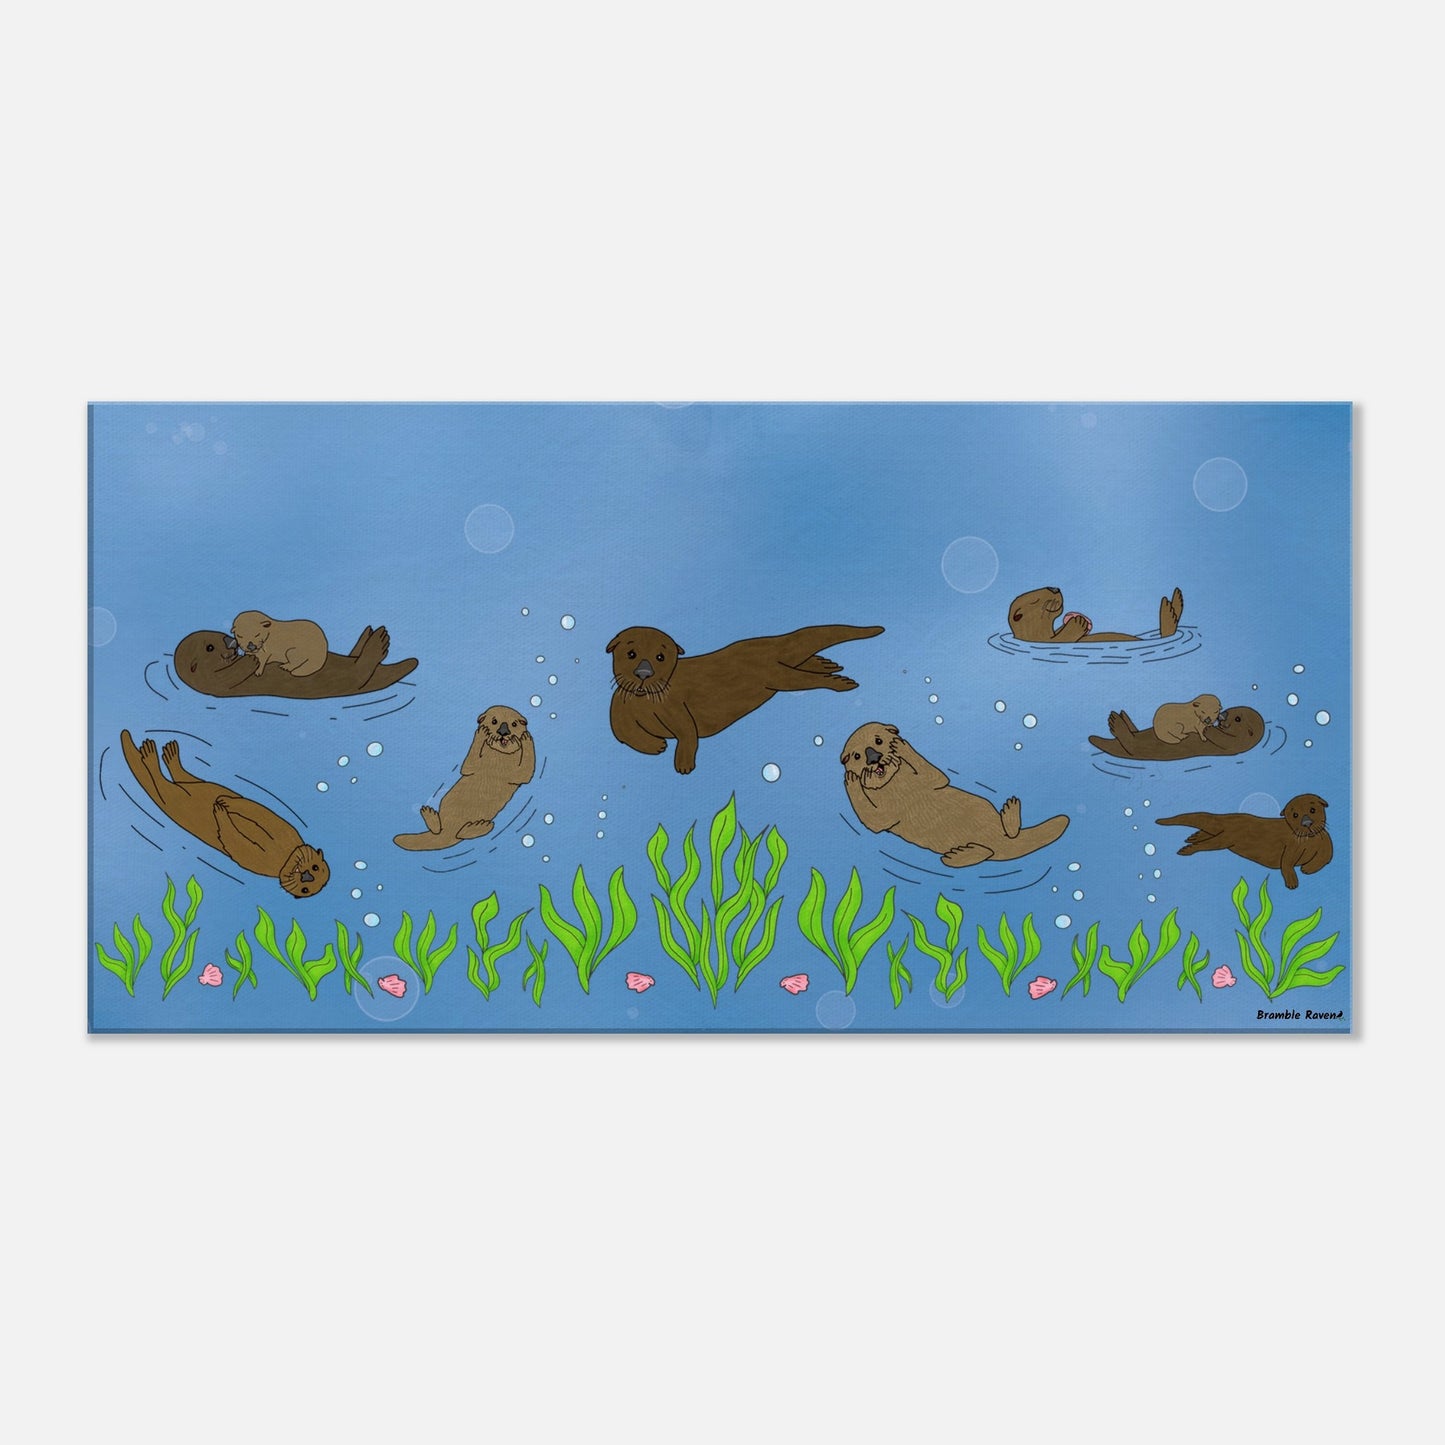 20 by 40 inch slim canvas wall art print of sea otters swimming along the seabed. Hanging hardware included for easy installation.